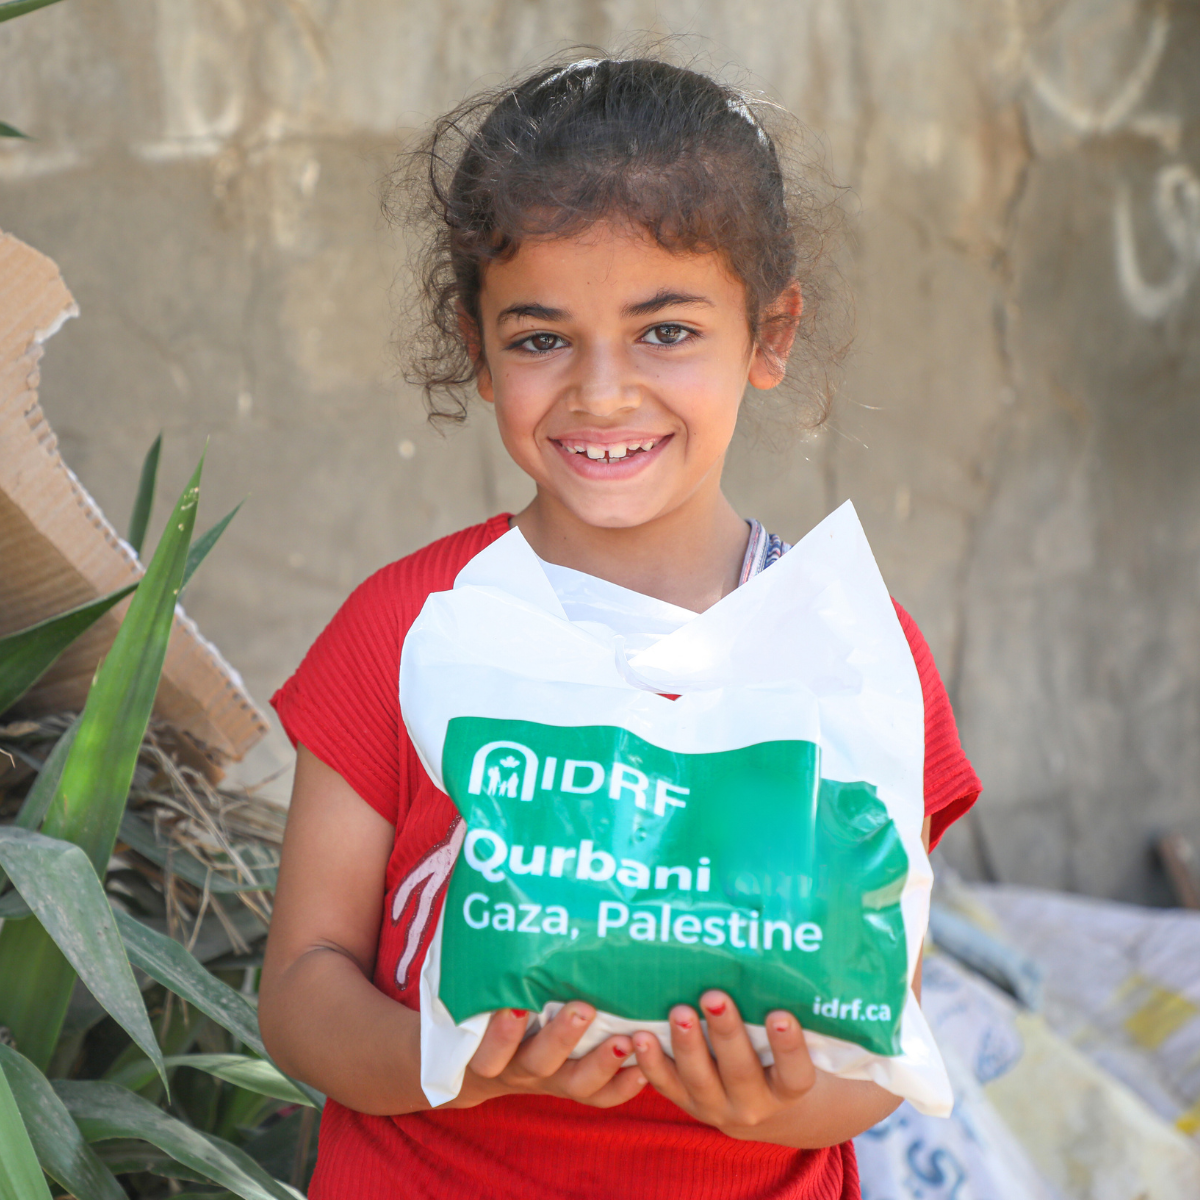 Click here for more information about Qurbani in Palestine